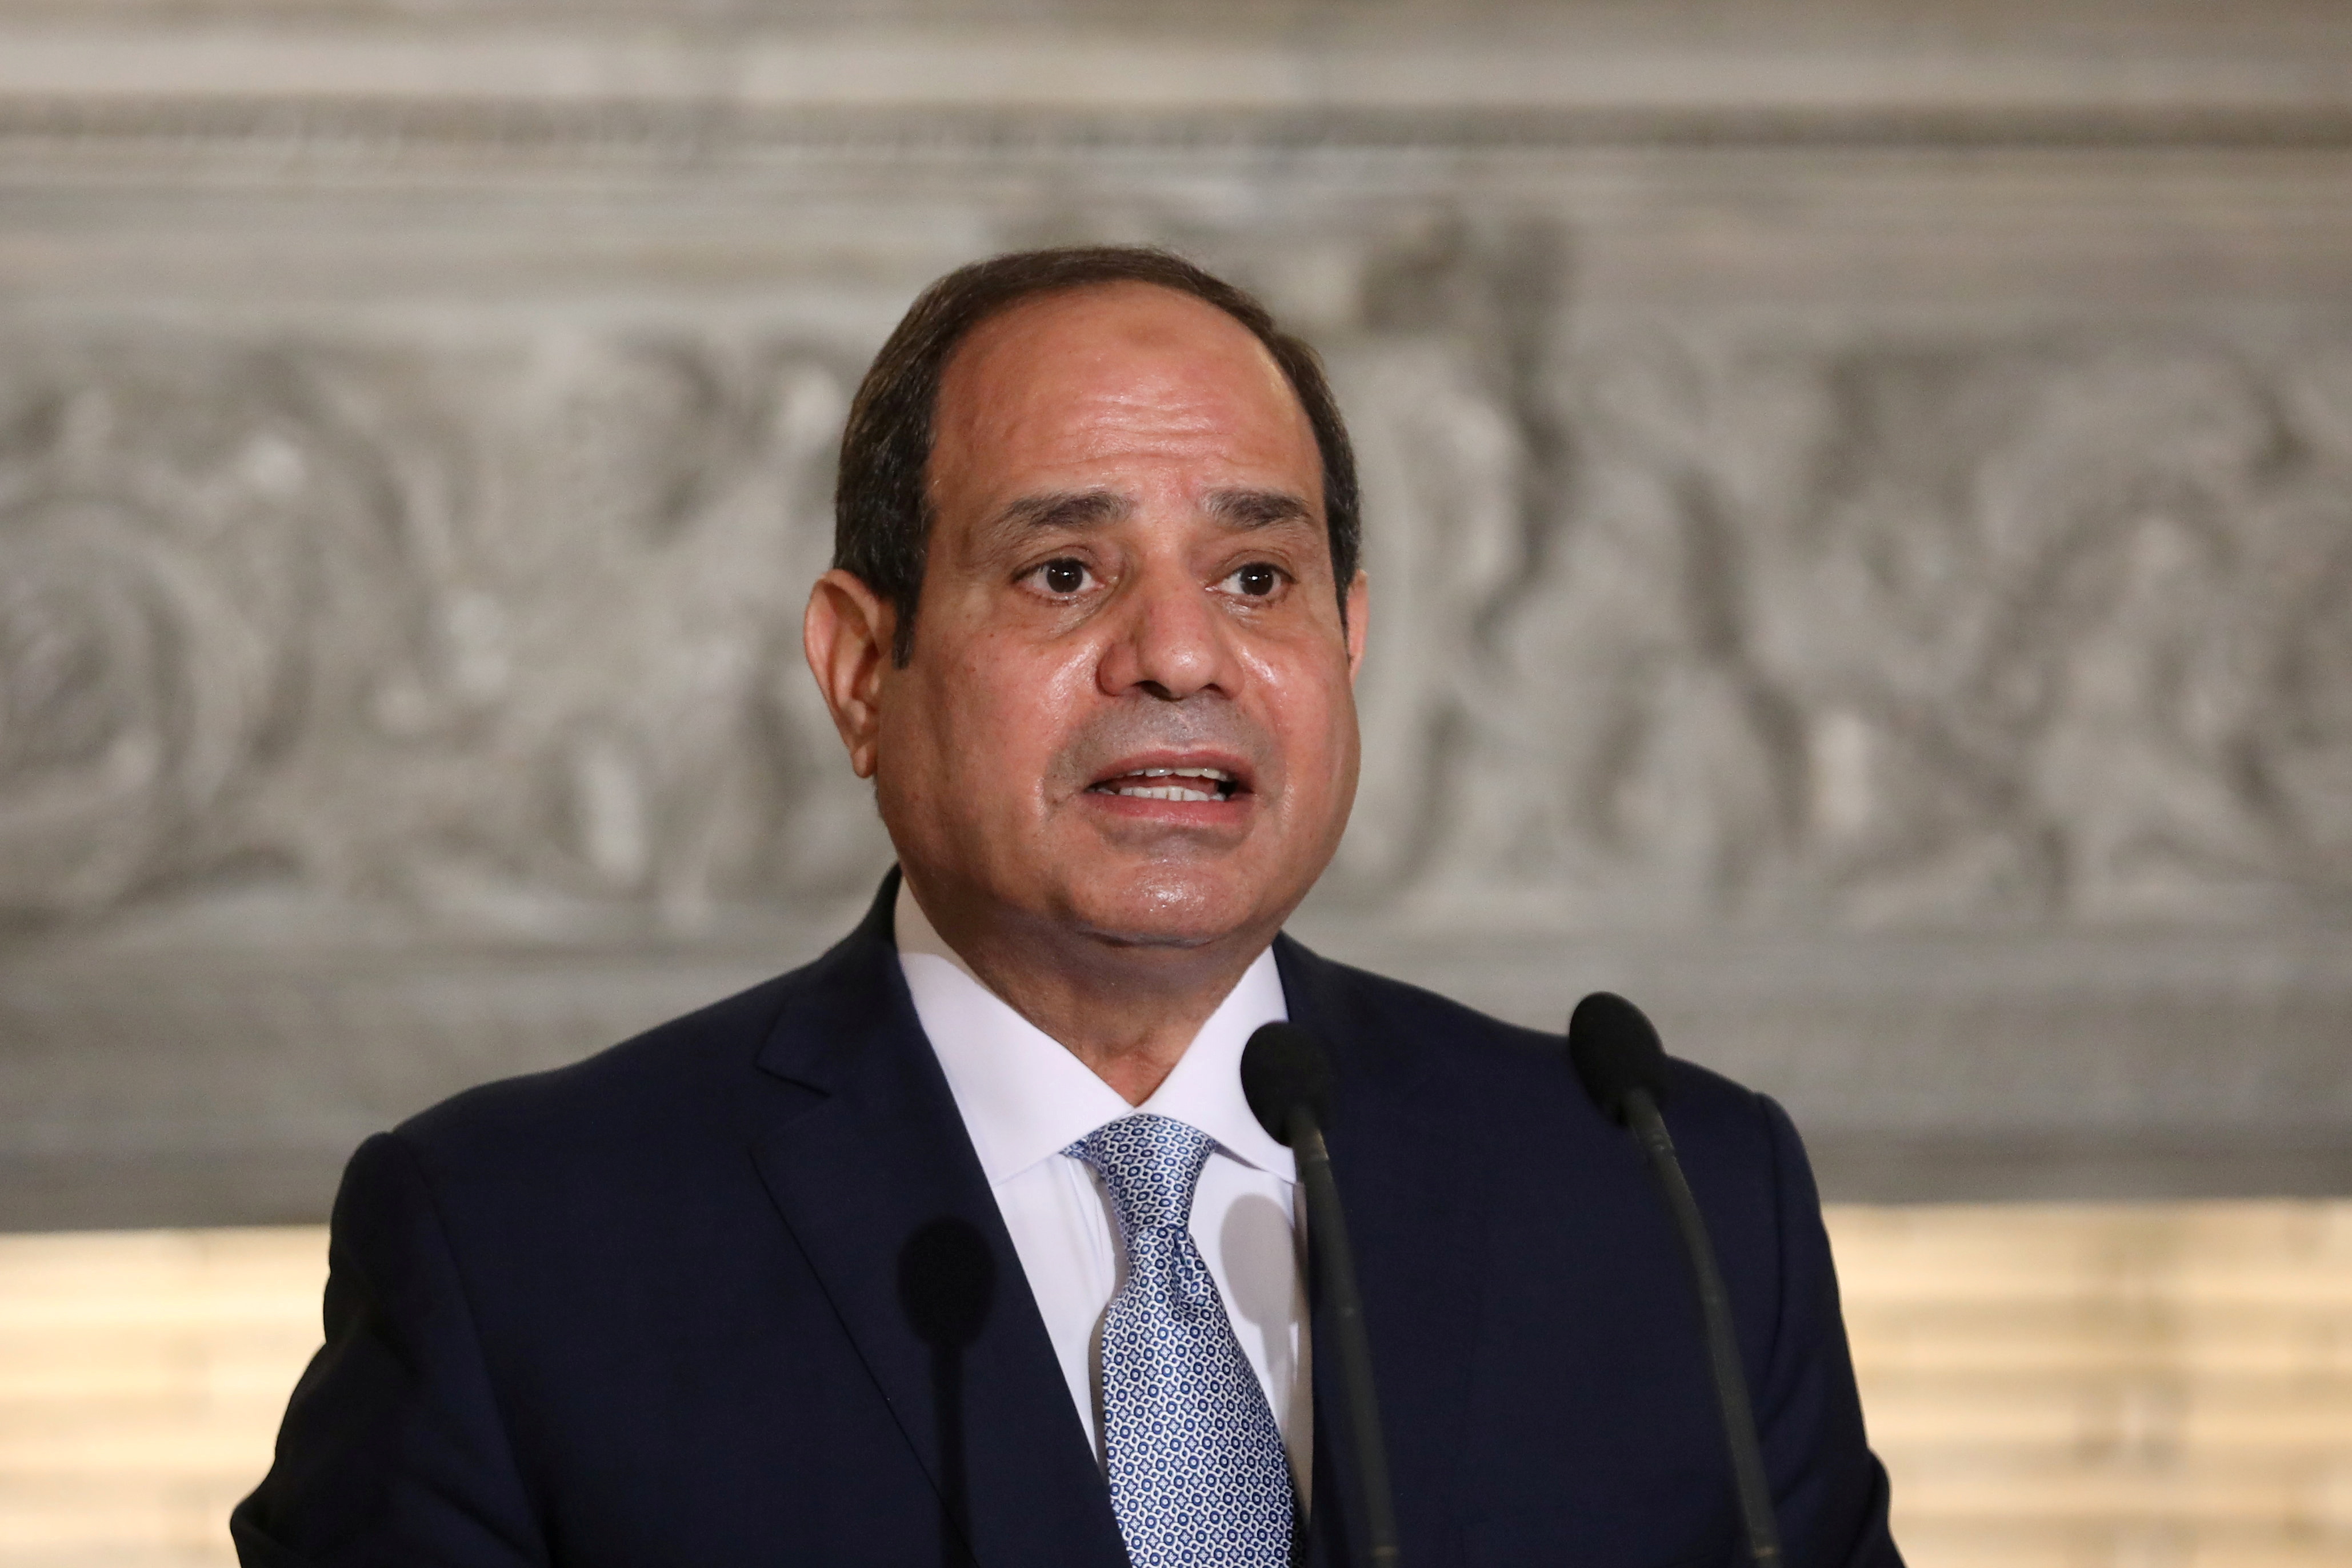 Egyptian President Abdel Fattah al-Sisi speaks during a joint news conference with Greek Prime Minister Kyriakos Mitsotakis at Maximos Mansion in Athens